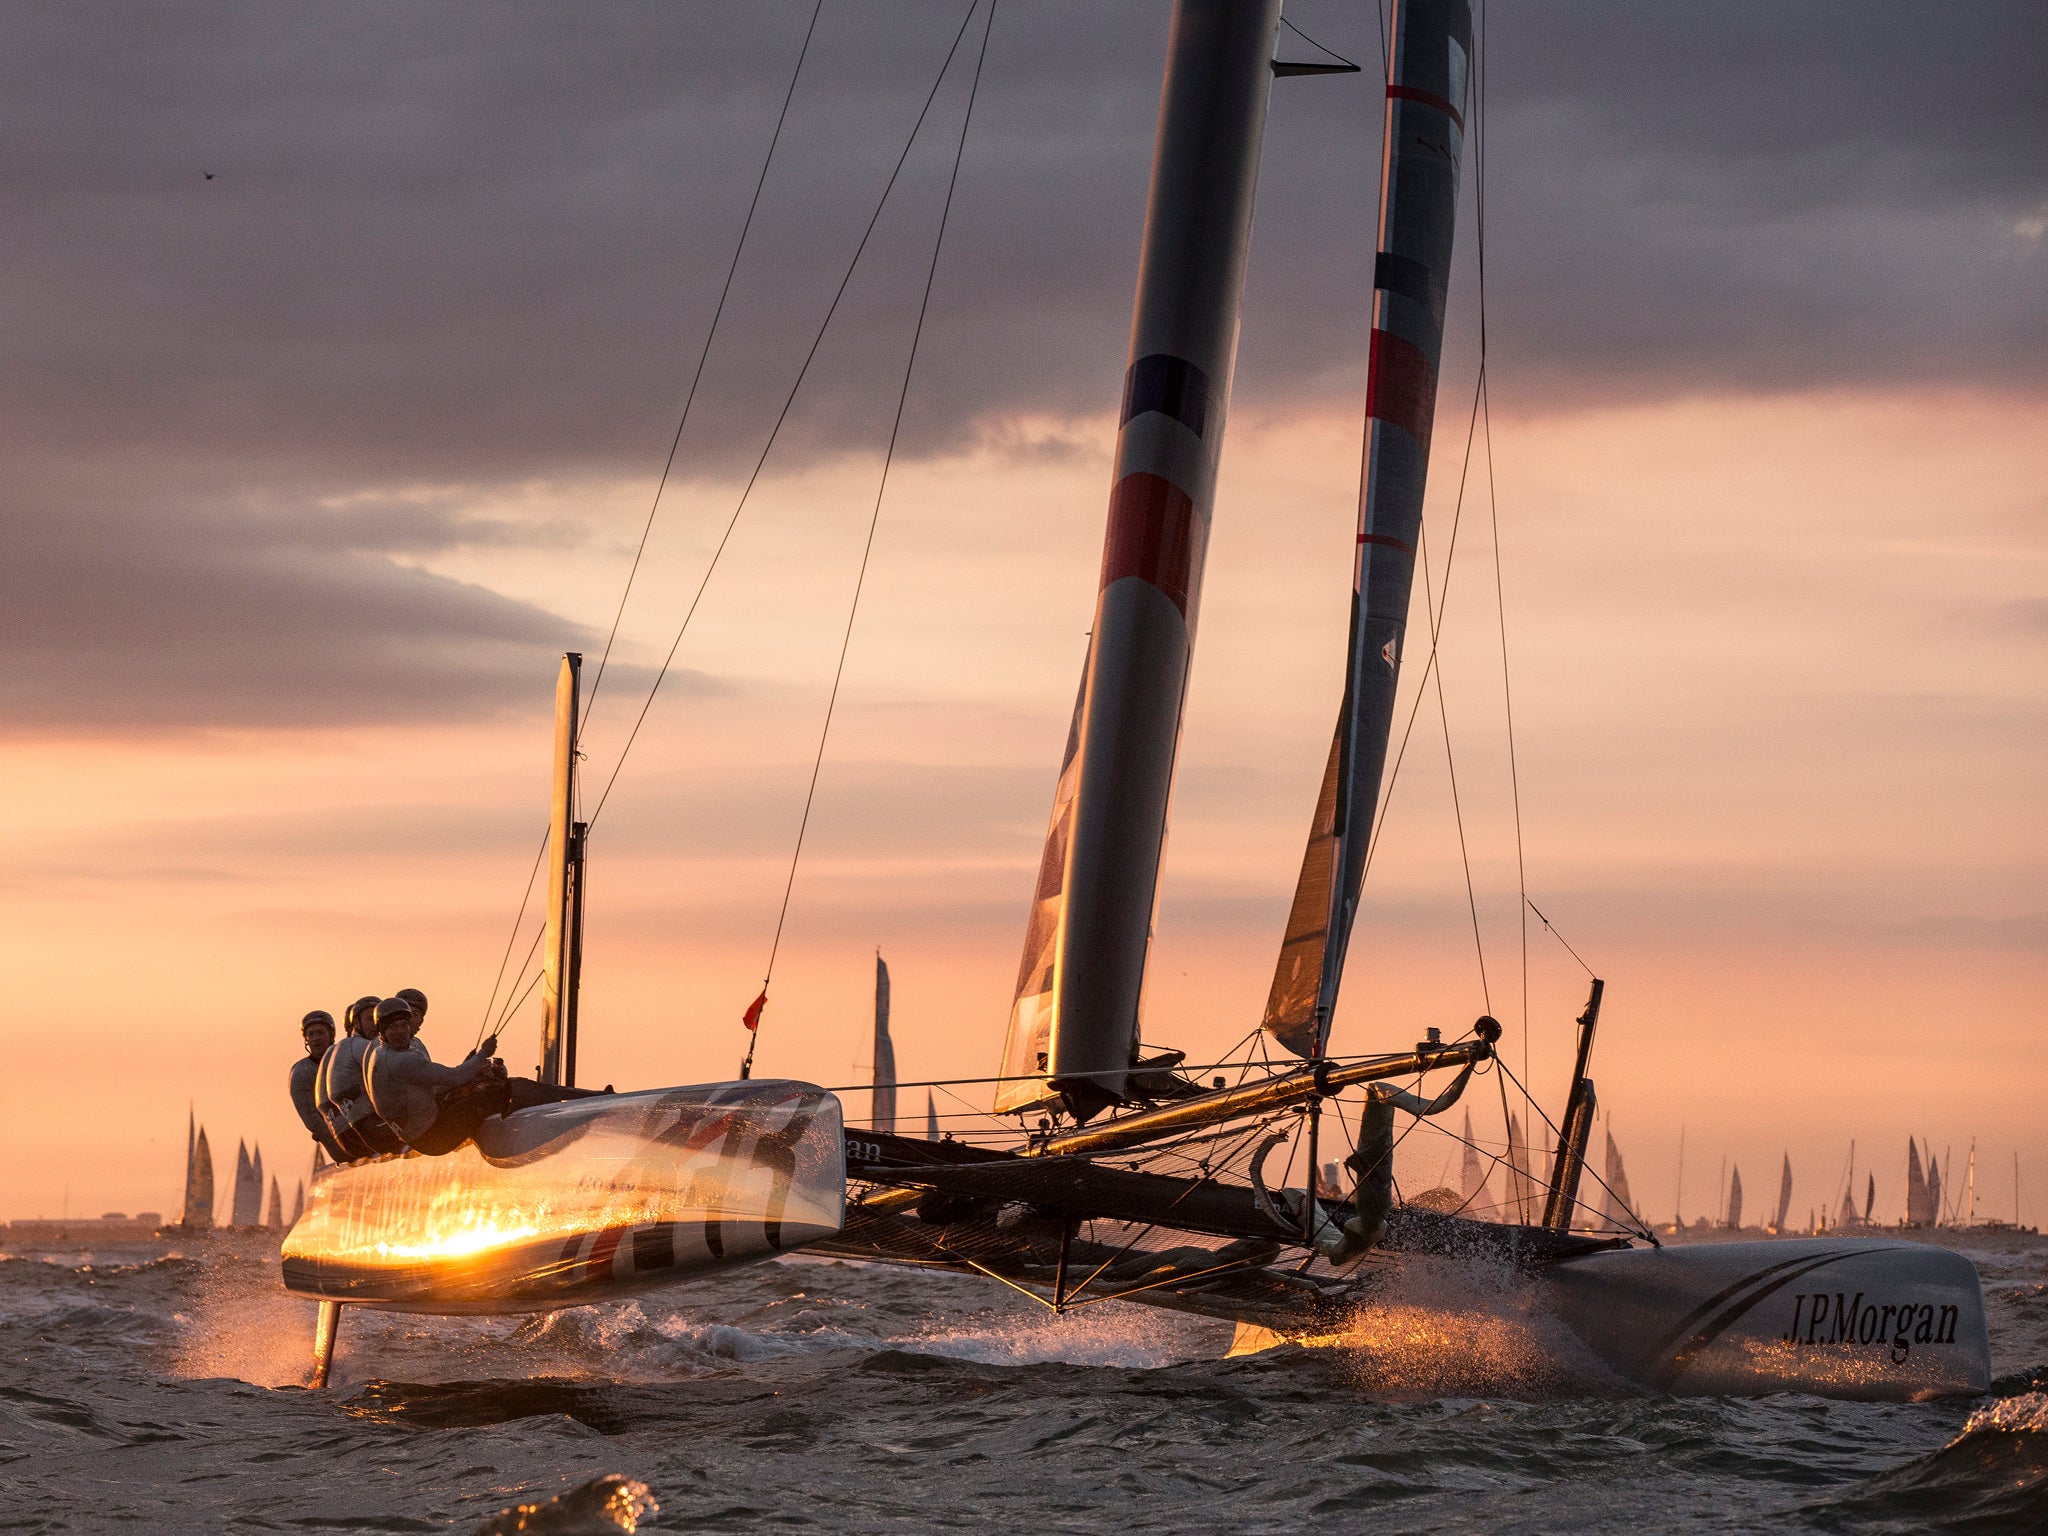 Dawn raider Ben Ainslie points his flying 45-foot catamaran at a new record for the J.P. Morgan Round the Island (of Wight) Race